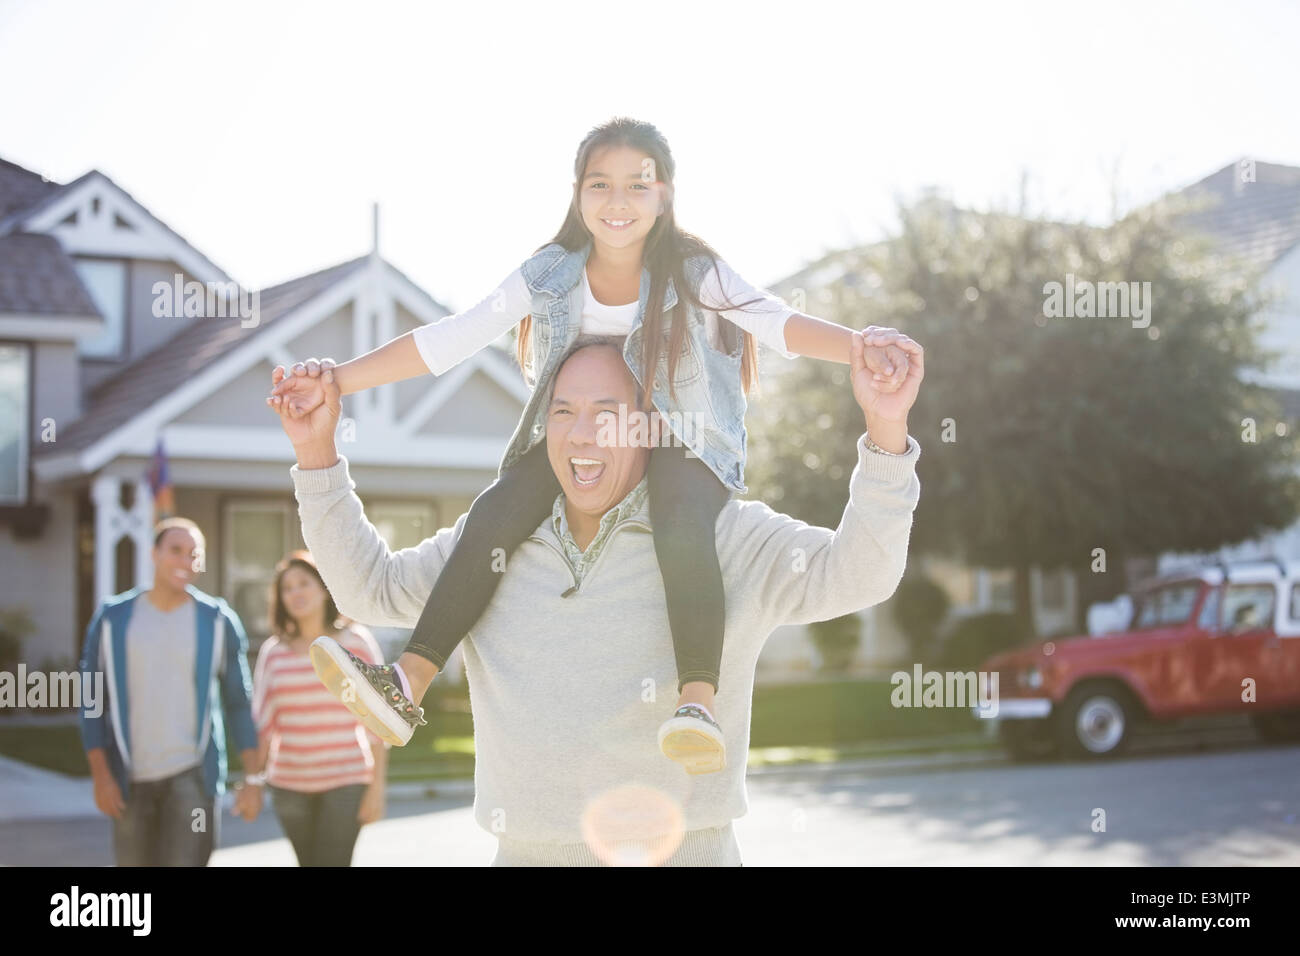 Portrait of grandfather carrying granddaughter on shoulders Stock Photo